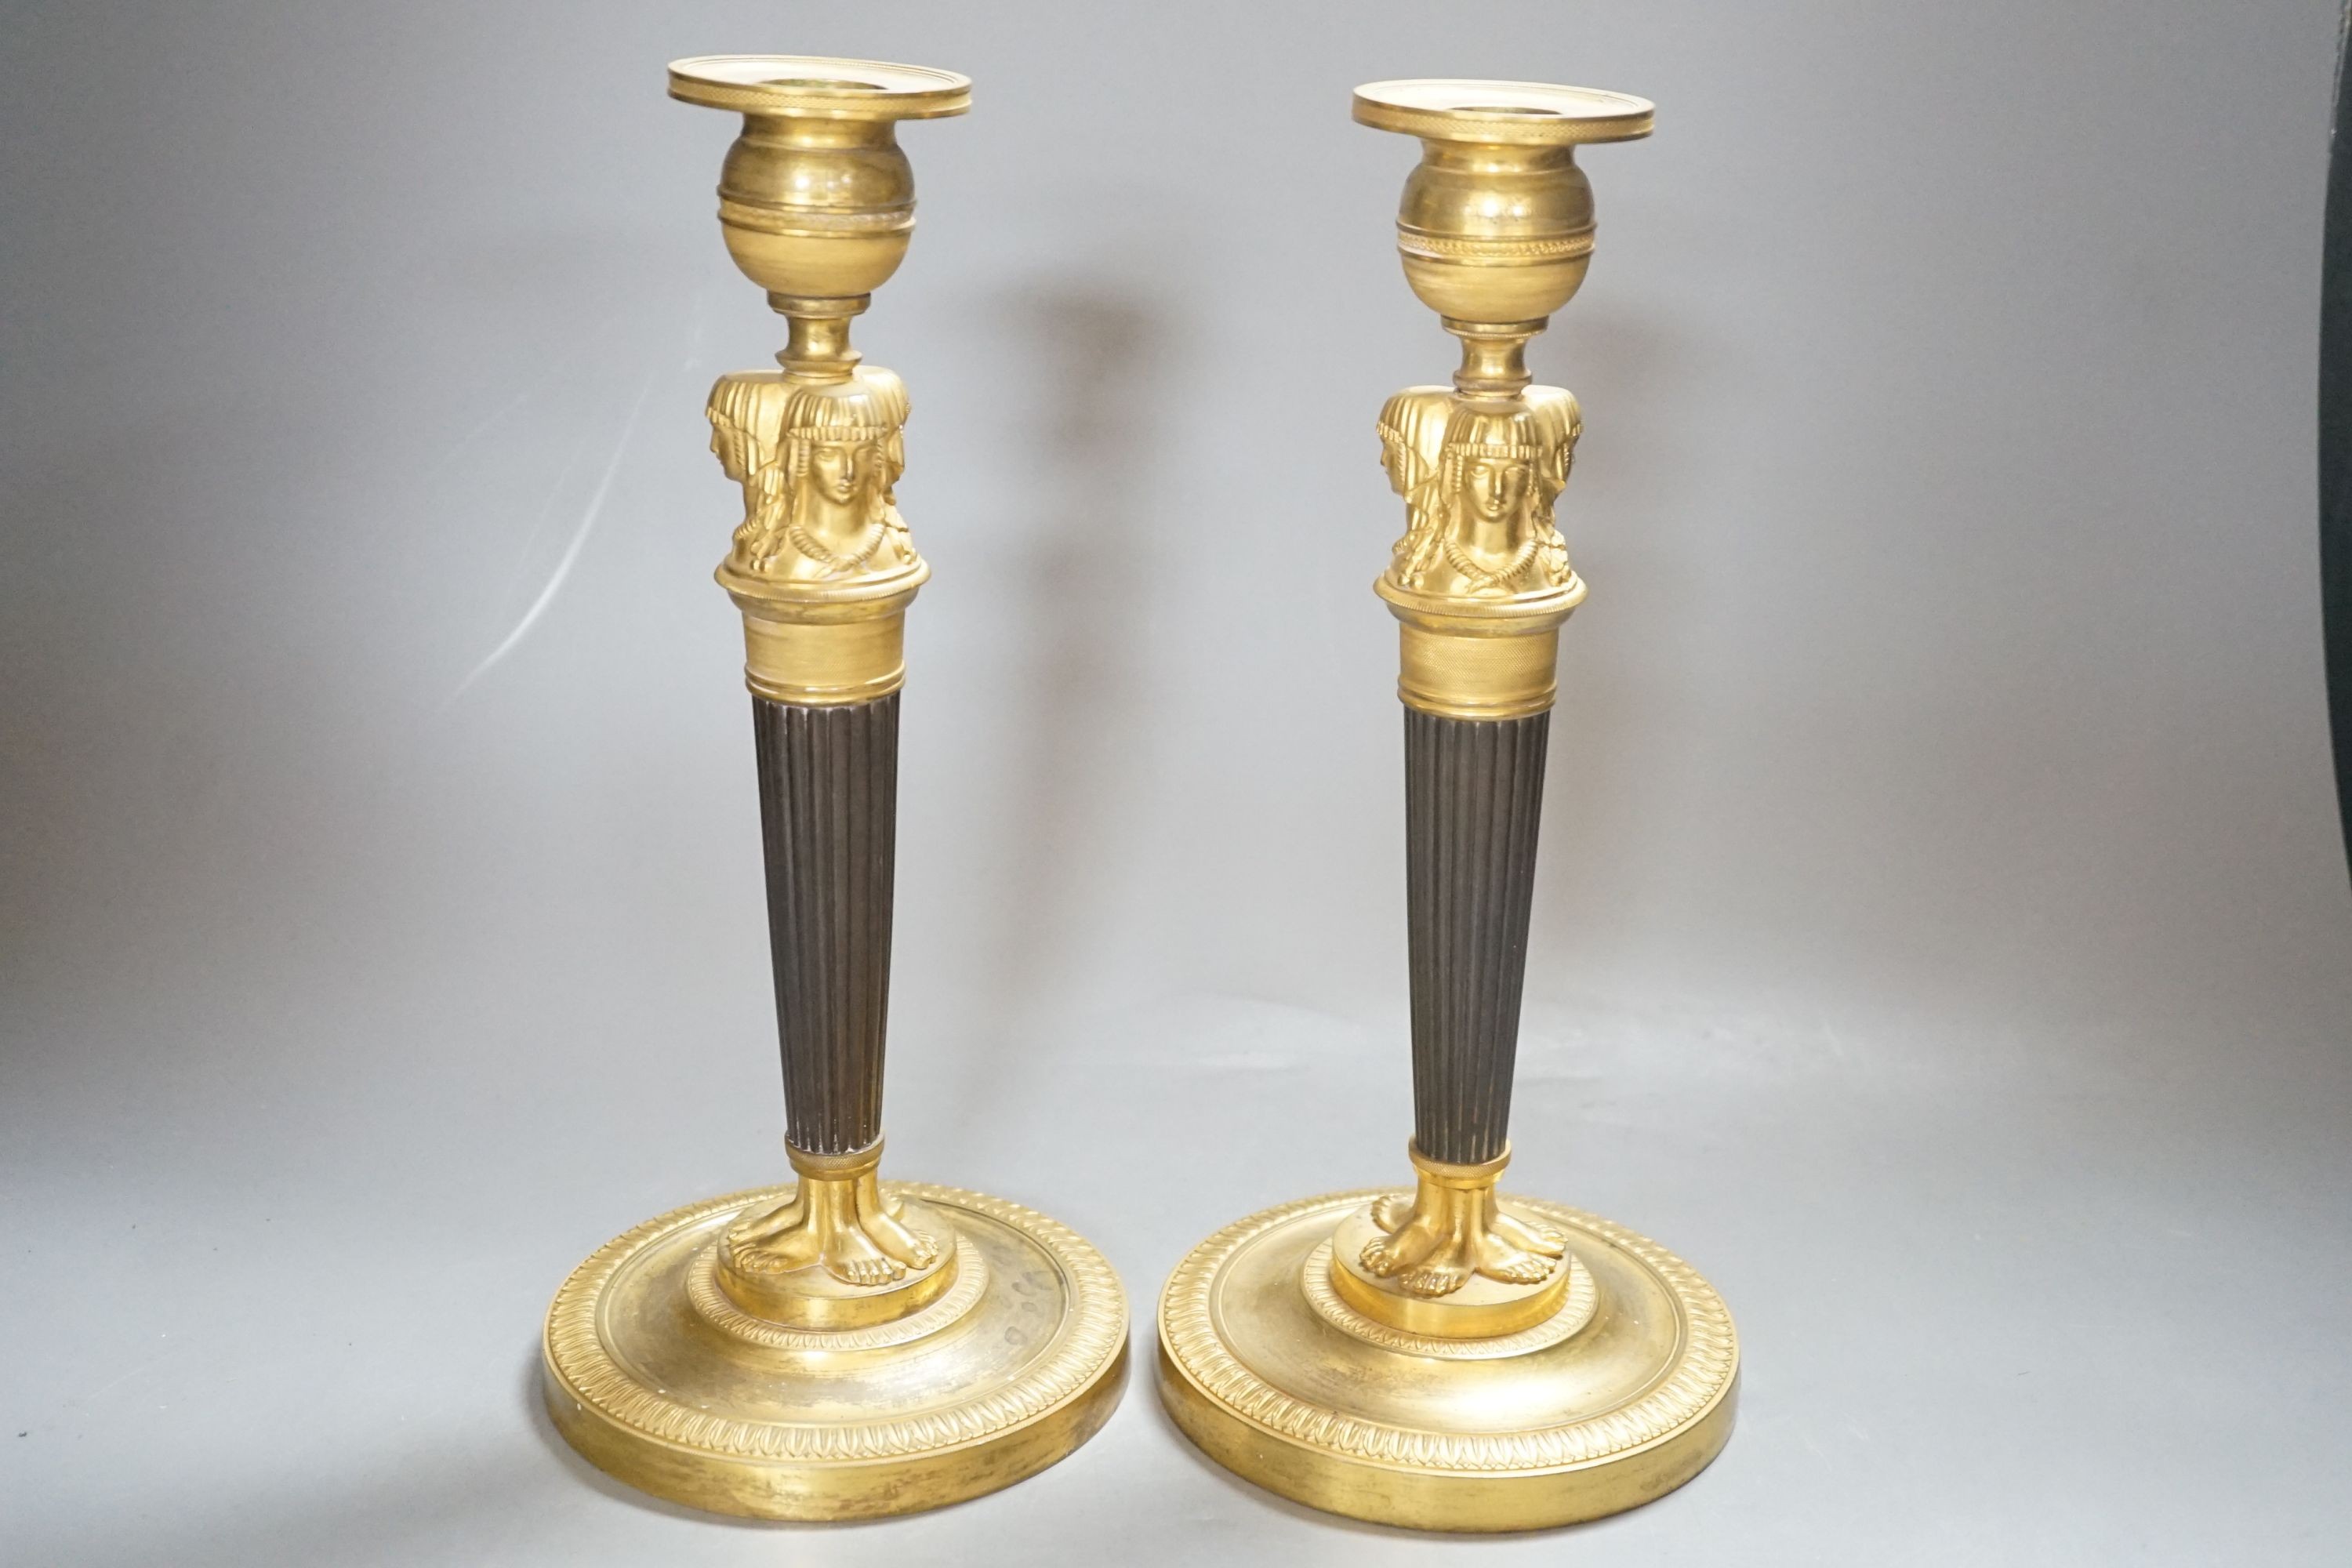 A pair of Empire style bronze and ormolu candlesticks - 29.5cm tall - Image 3 of 3